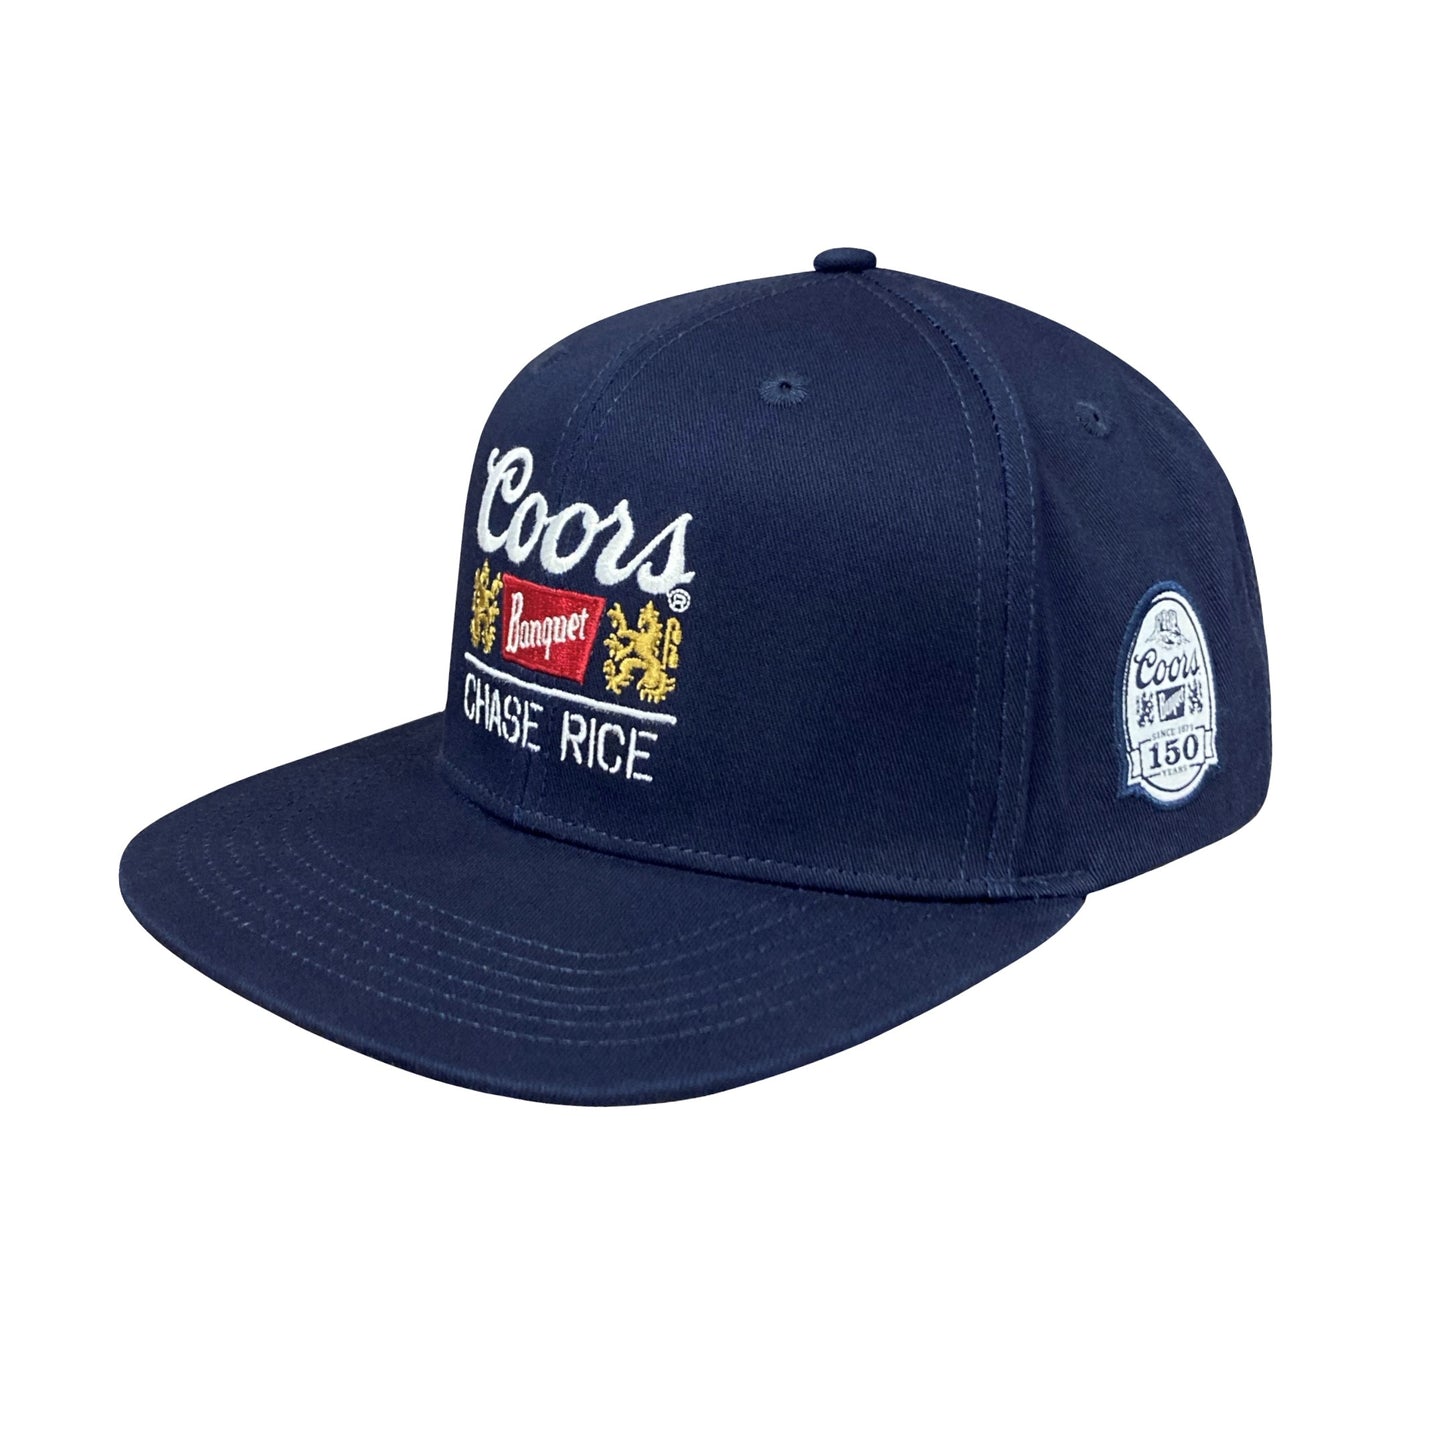 CB x Coors Chase Rice Solid Cap